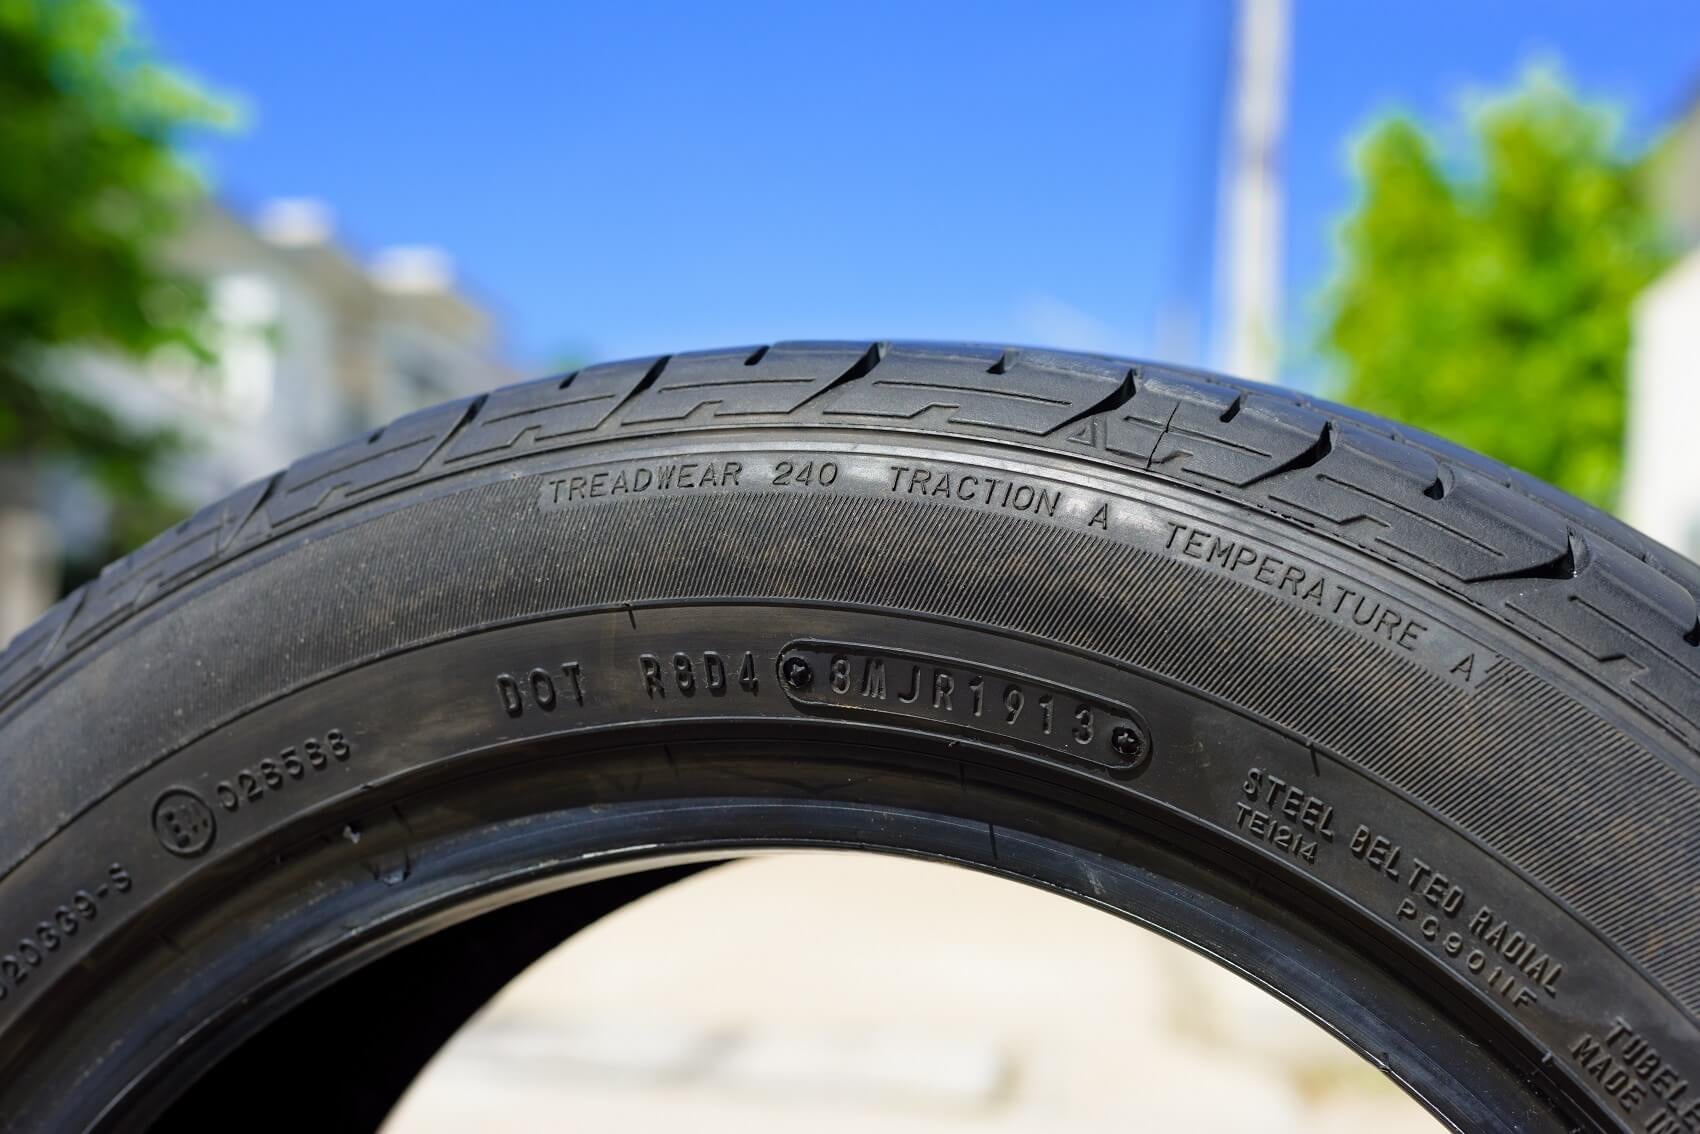 How to Read Tire Sizes